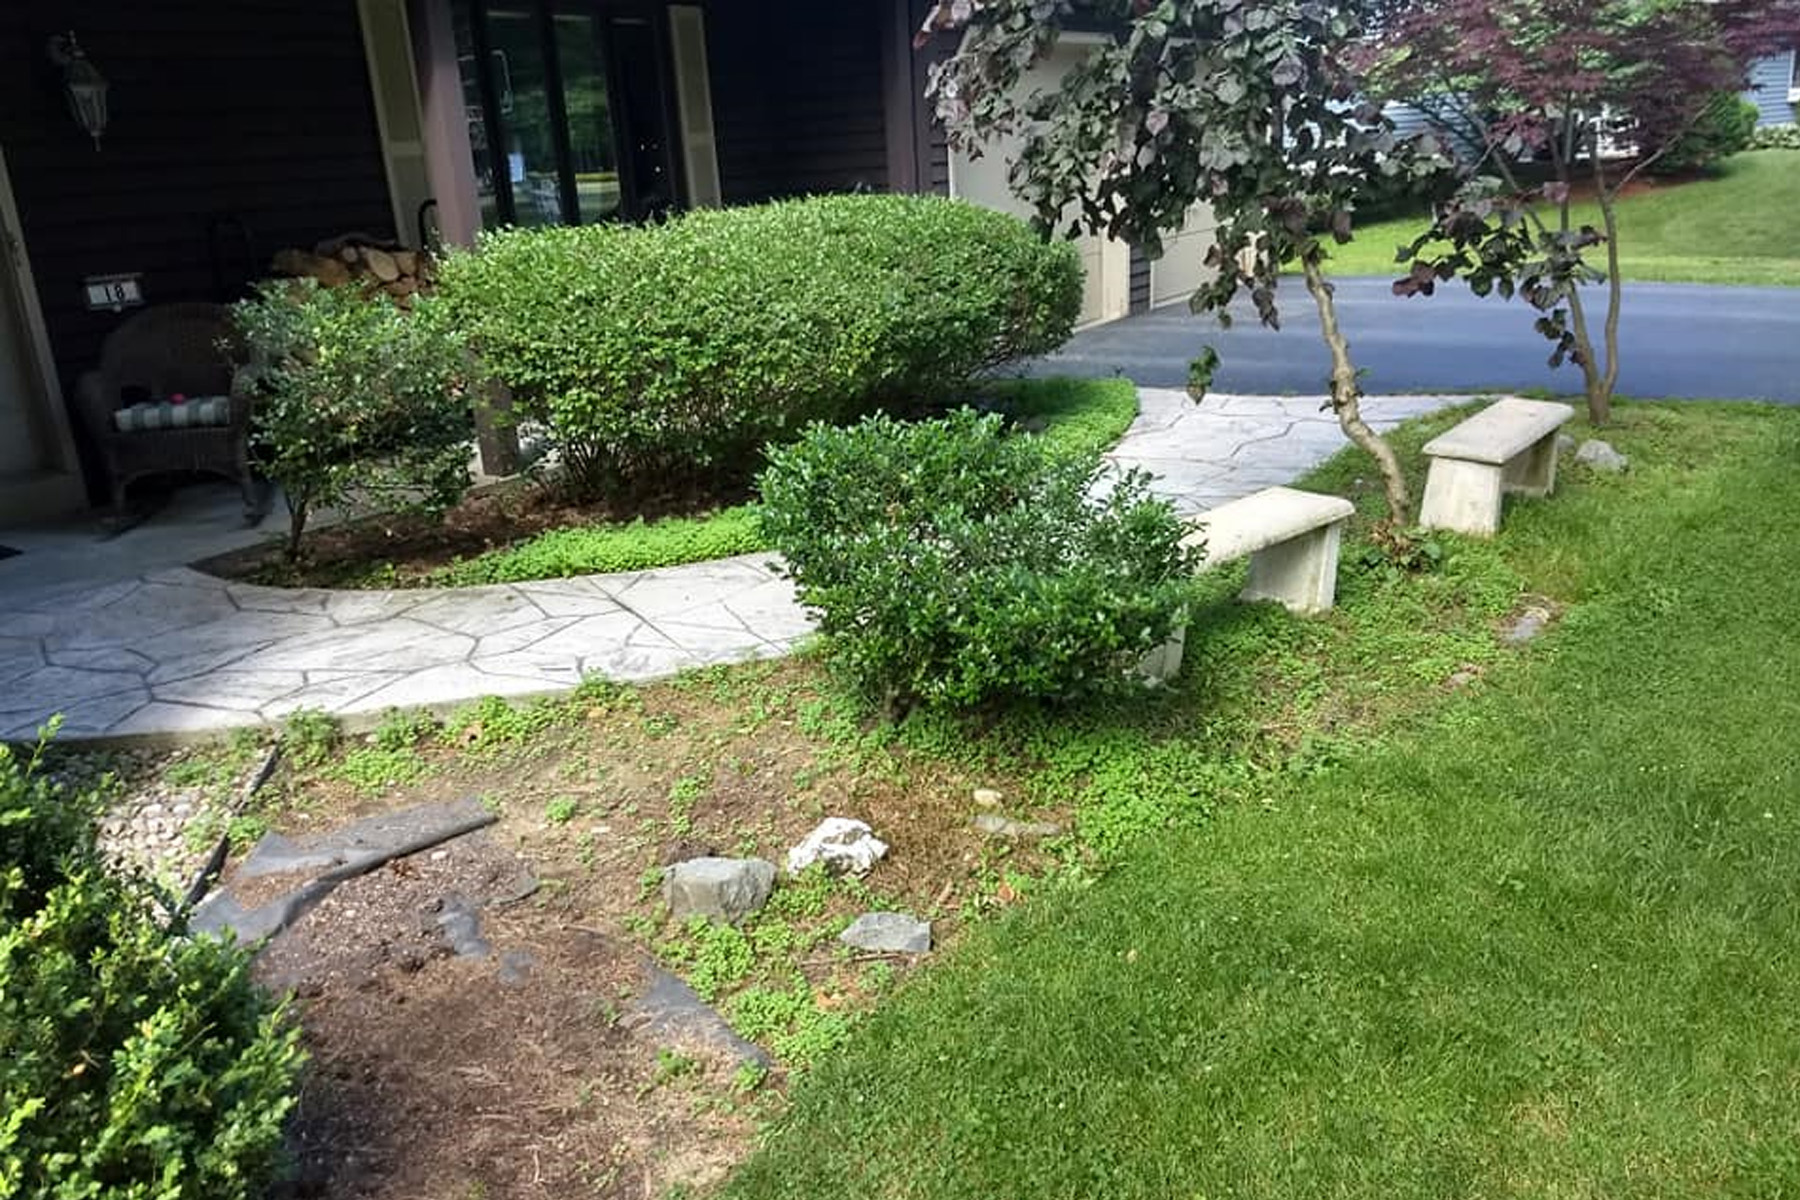 Thumbnail of an overgrown plant bed and stone seating area in the front of a house